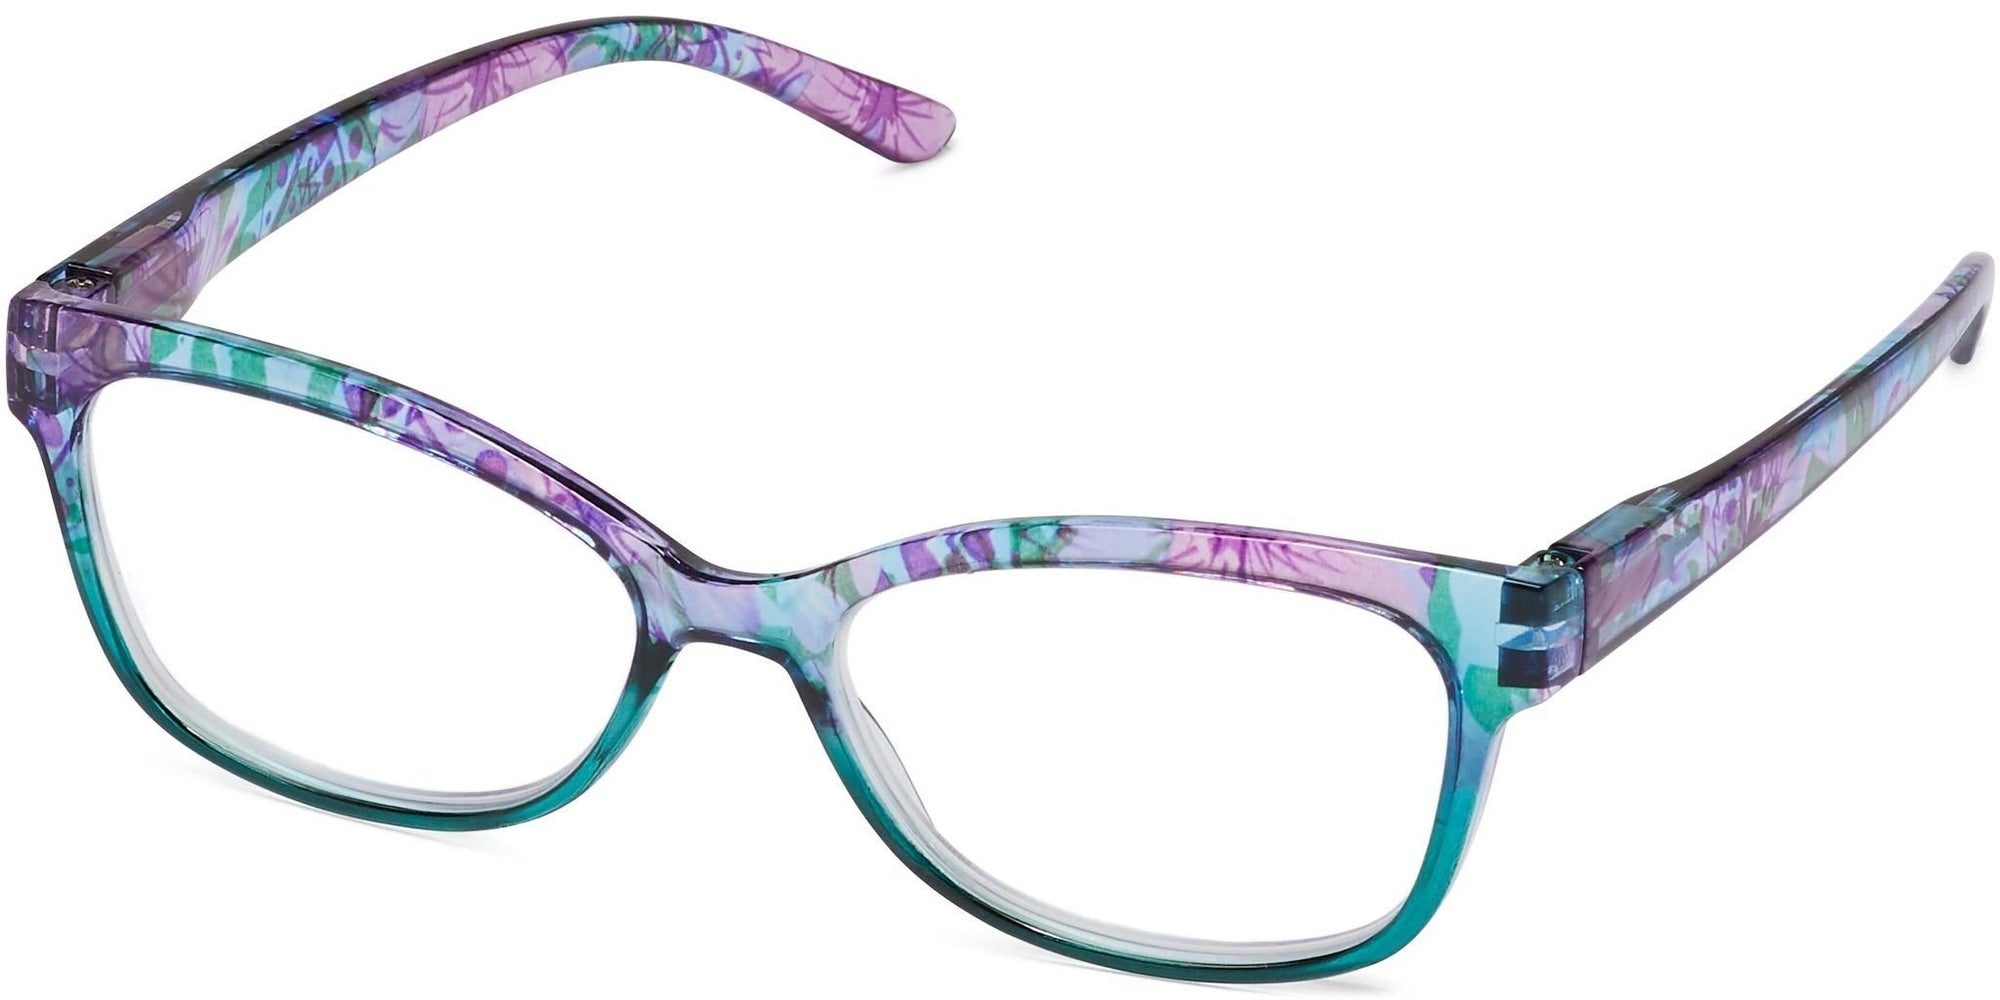 Grenchen - Purple / Turquoise / 1.25 - Reading Glasses